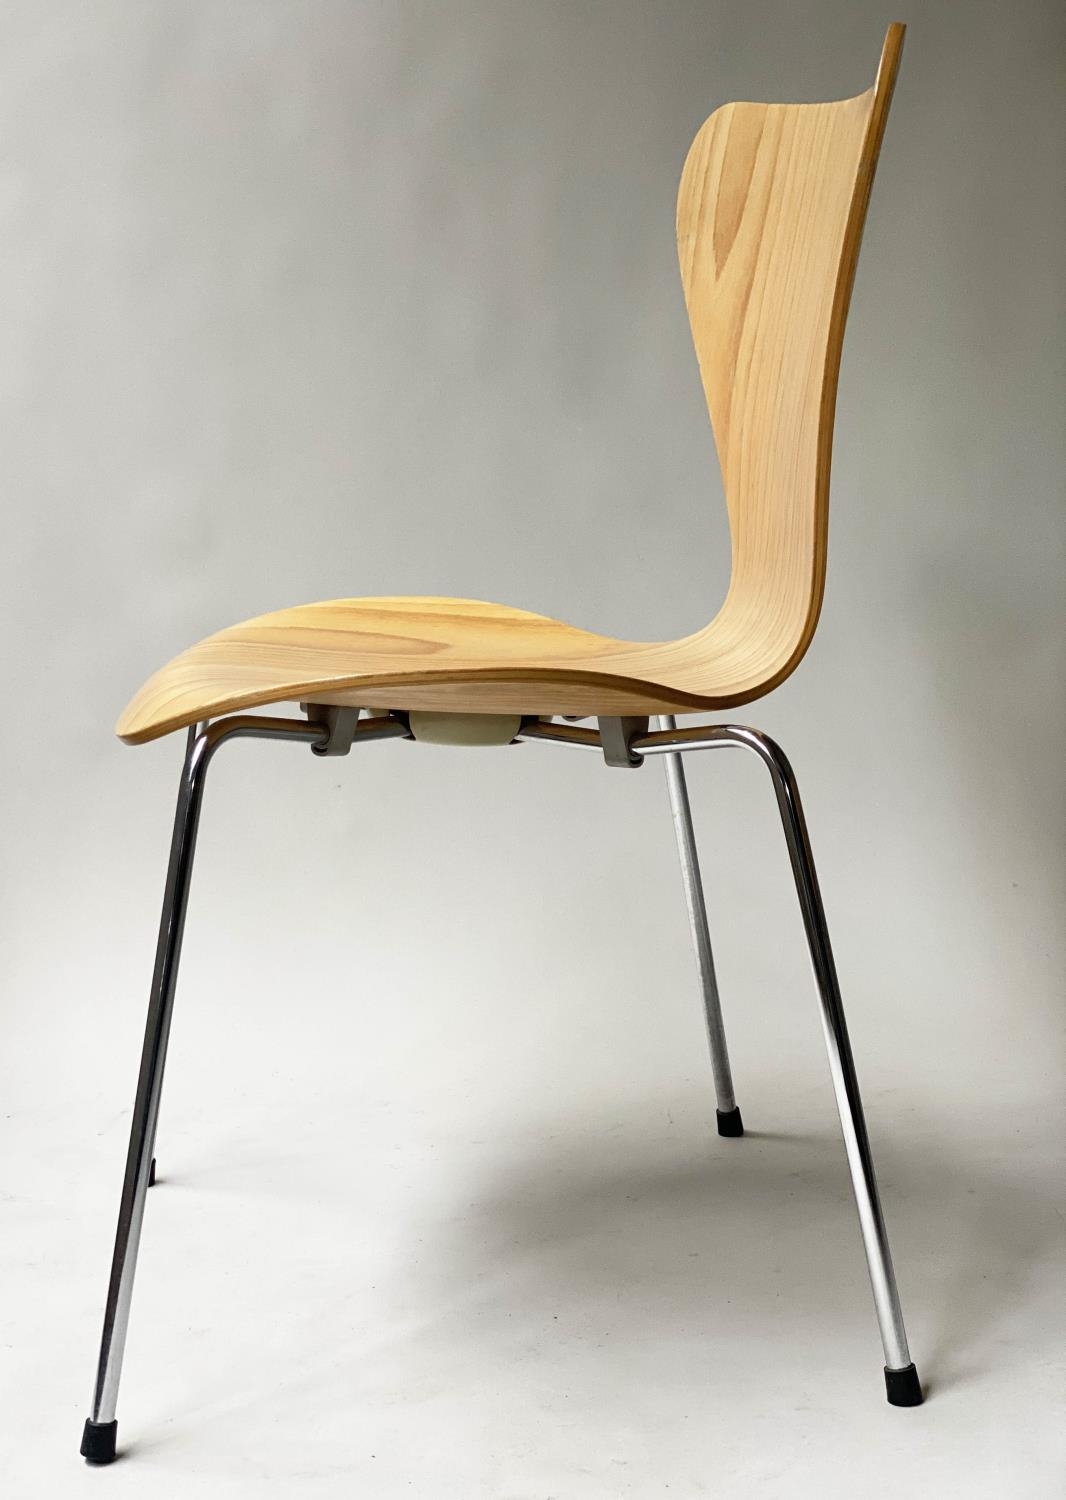 FRITZ HANSEN SERIES 7 DINING CHAIRS, a set of six, by Arne Jacobsen, bentwood and stacking ( - Image 6 of 7